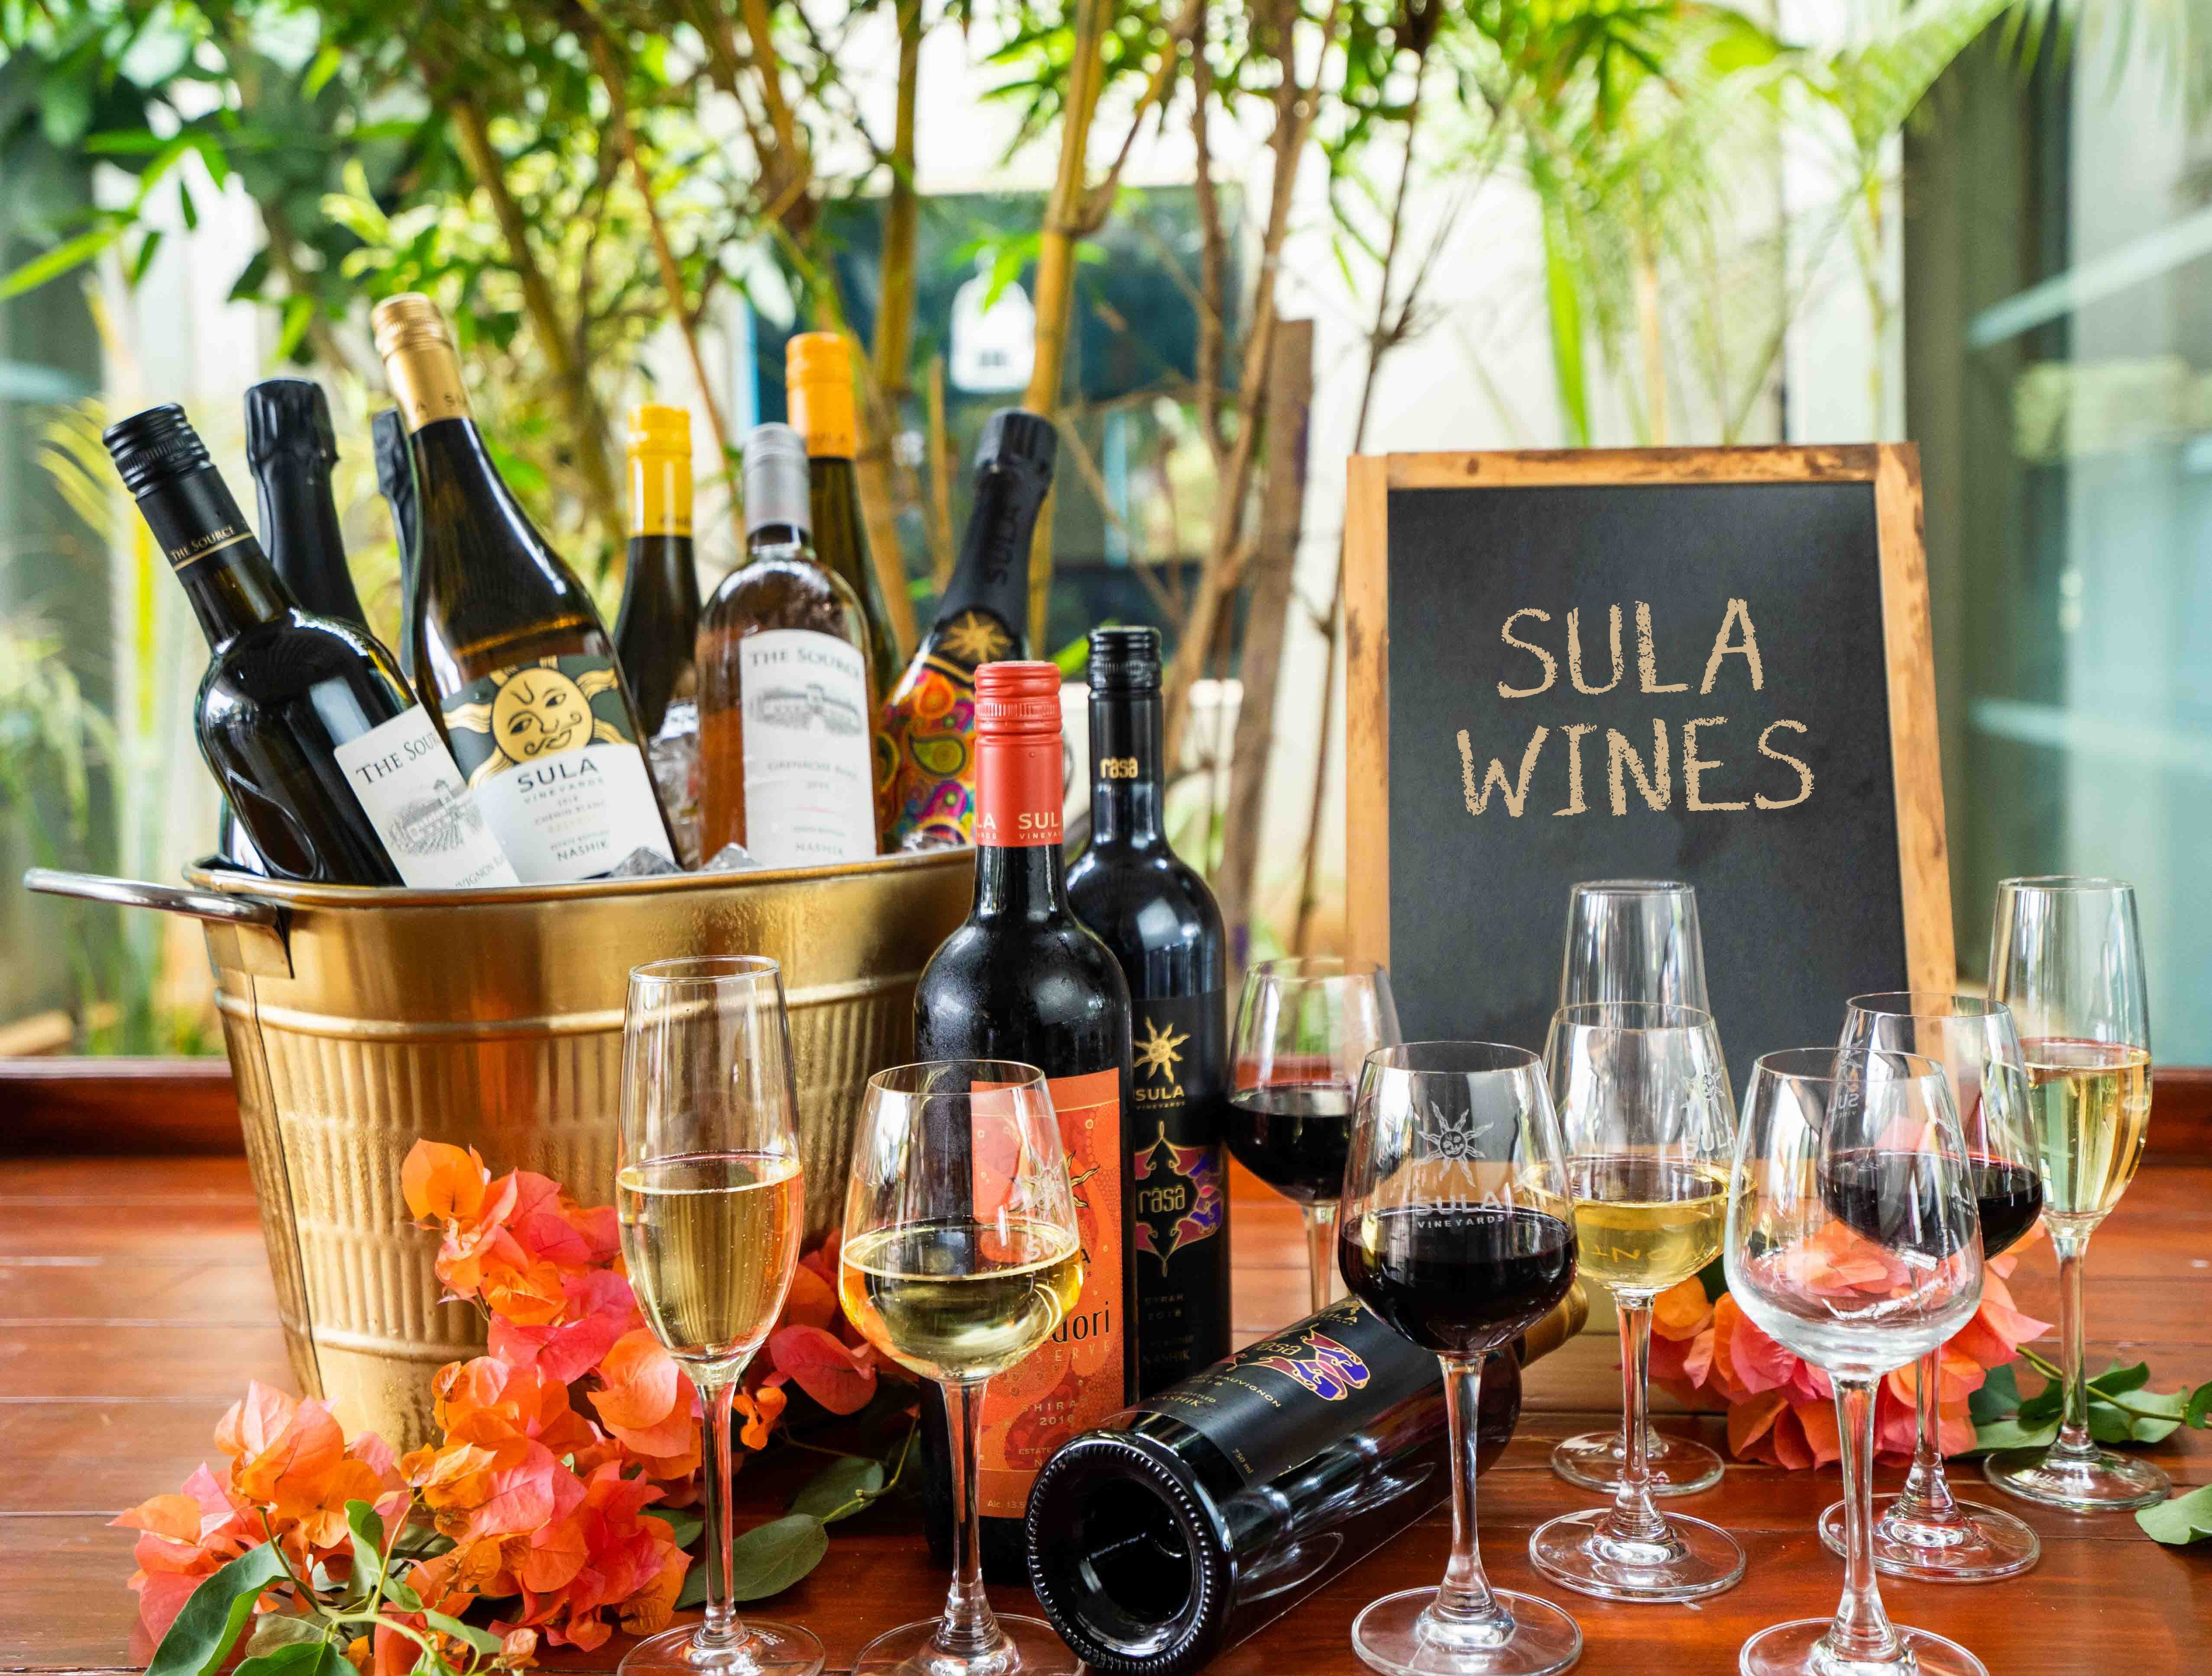 Sula, from the state of Maharashtra, India, is a forerunner in the potentially enormous Indian market that is only just discovering wine. Photos: Sula Wines